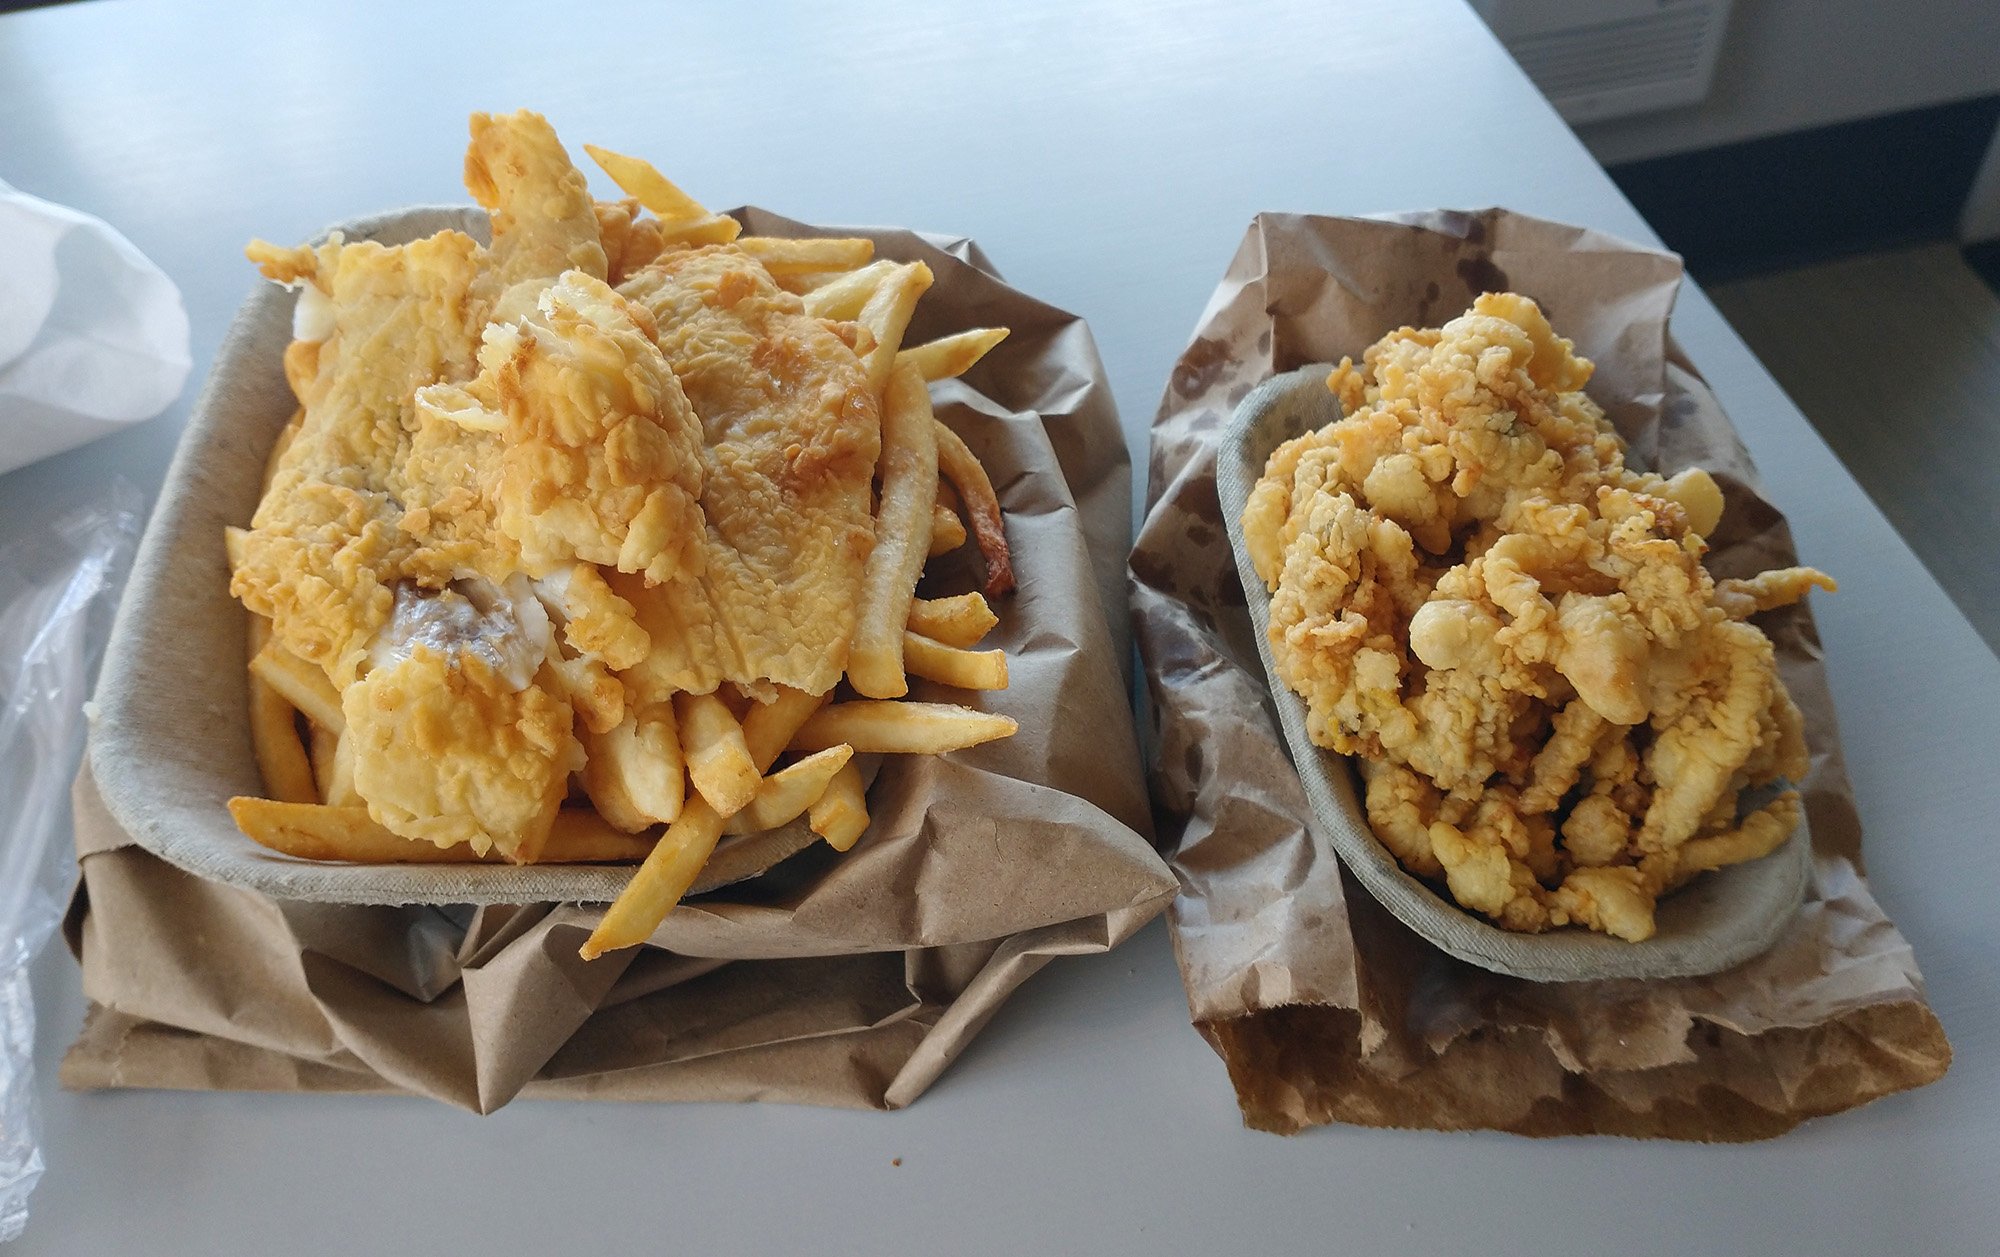 Fried haddock is Nova Scotia/New Brunswick's version of Fish n' Chips. Not as good as Cod imo. The fried clams are little rubber bands, nothing too special.